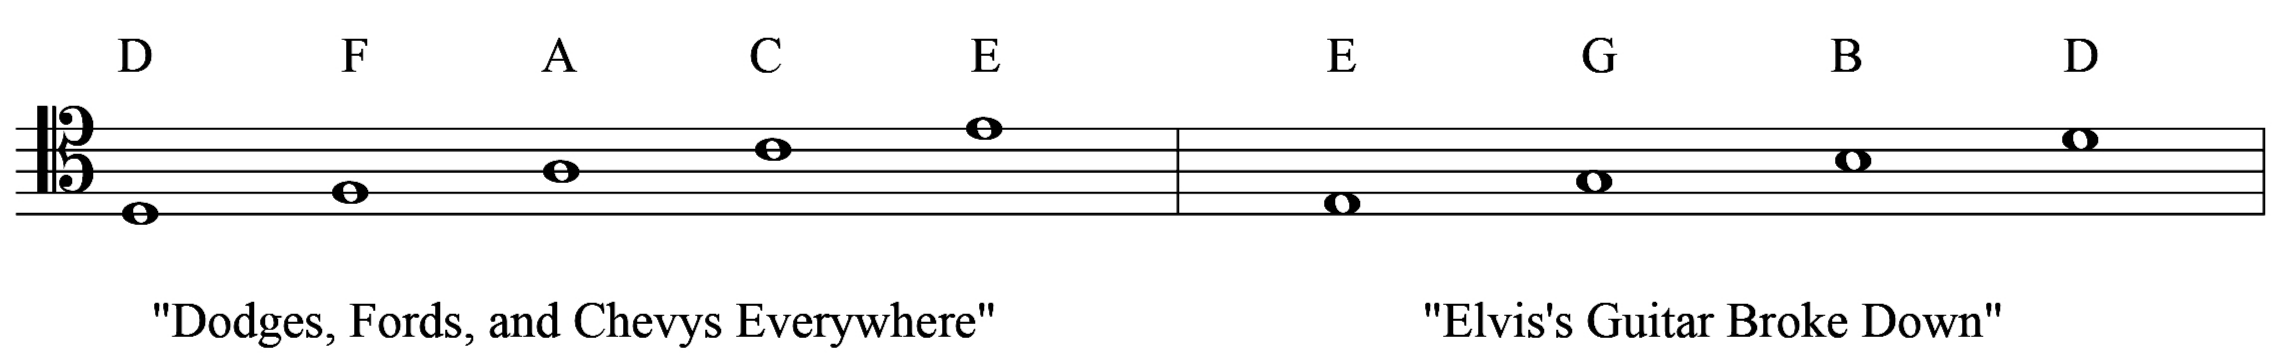 Tenor clef notes on lines and spaces labeled on a staff.